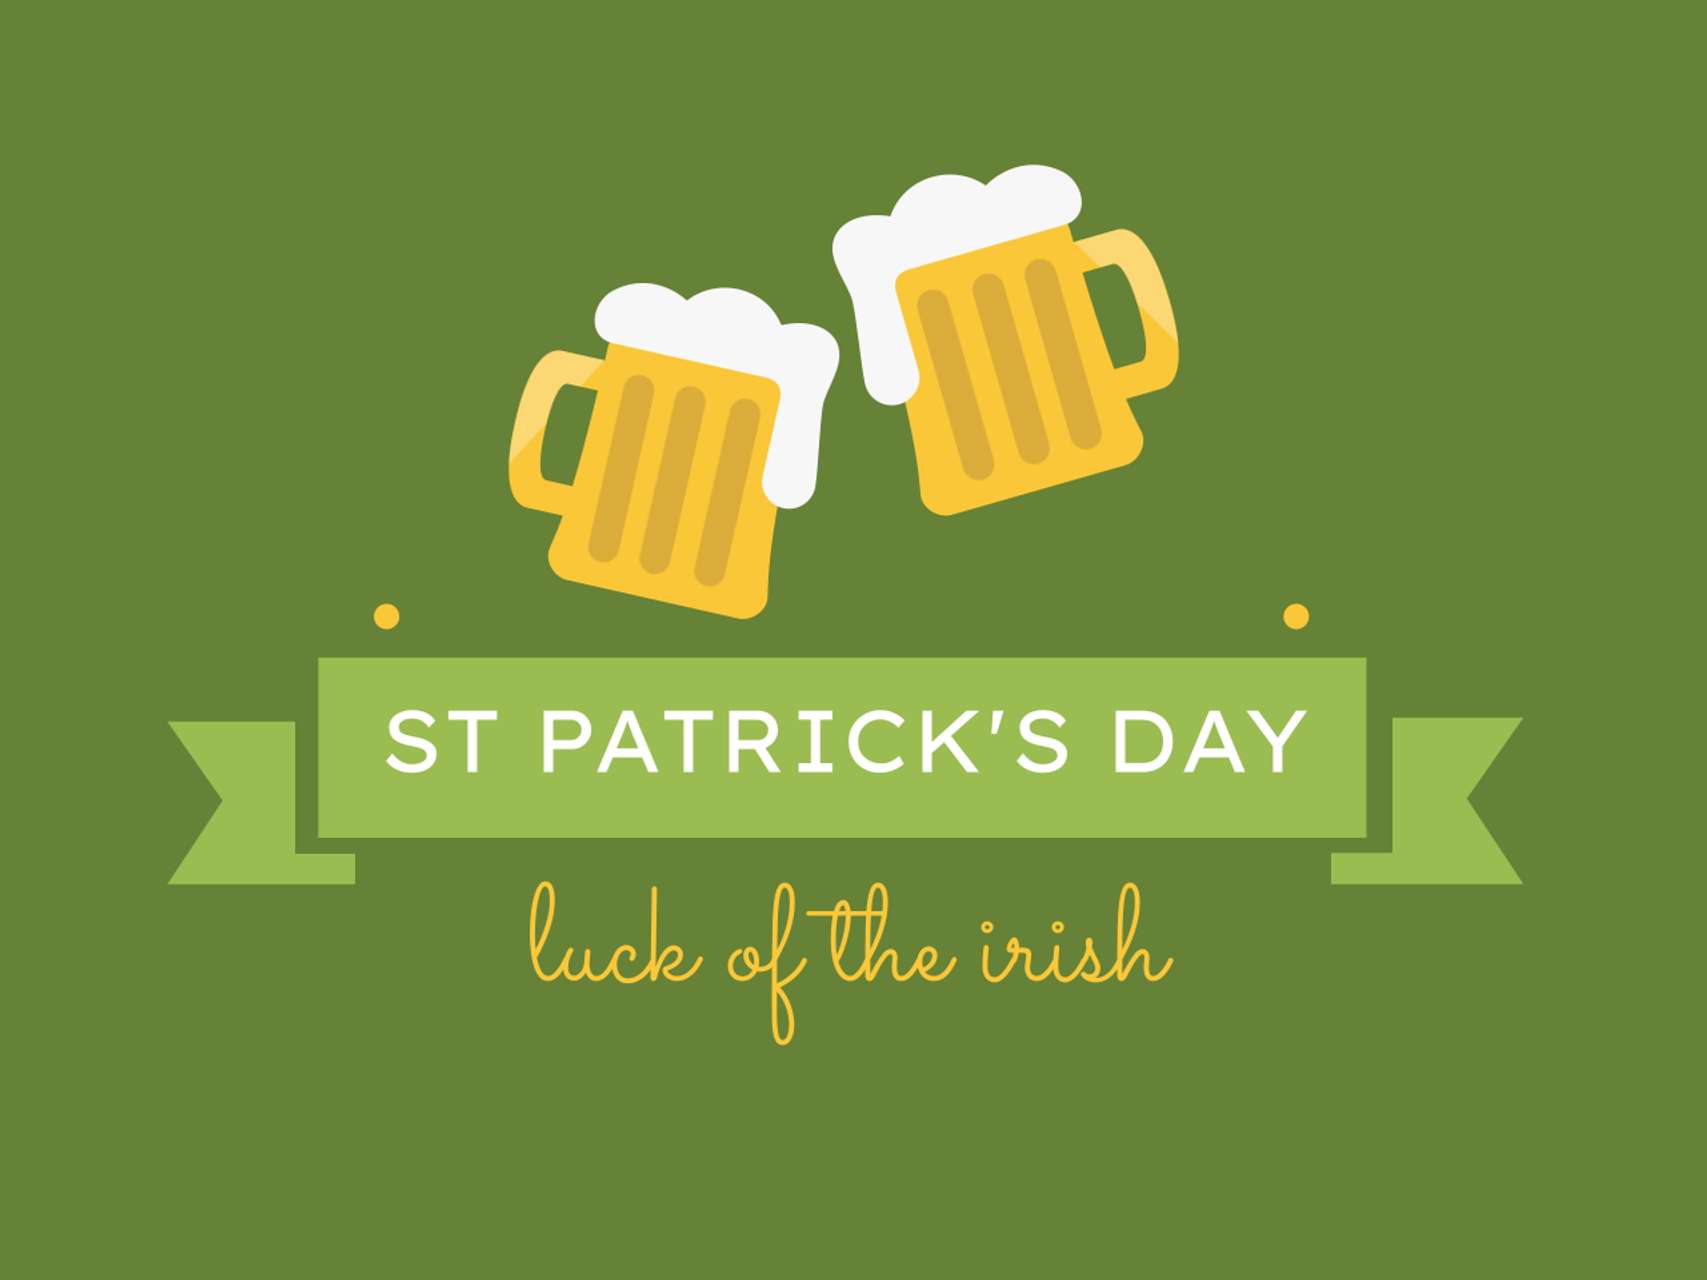 St. Patrick’s Day Templates Pack